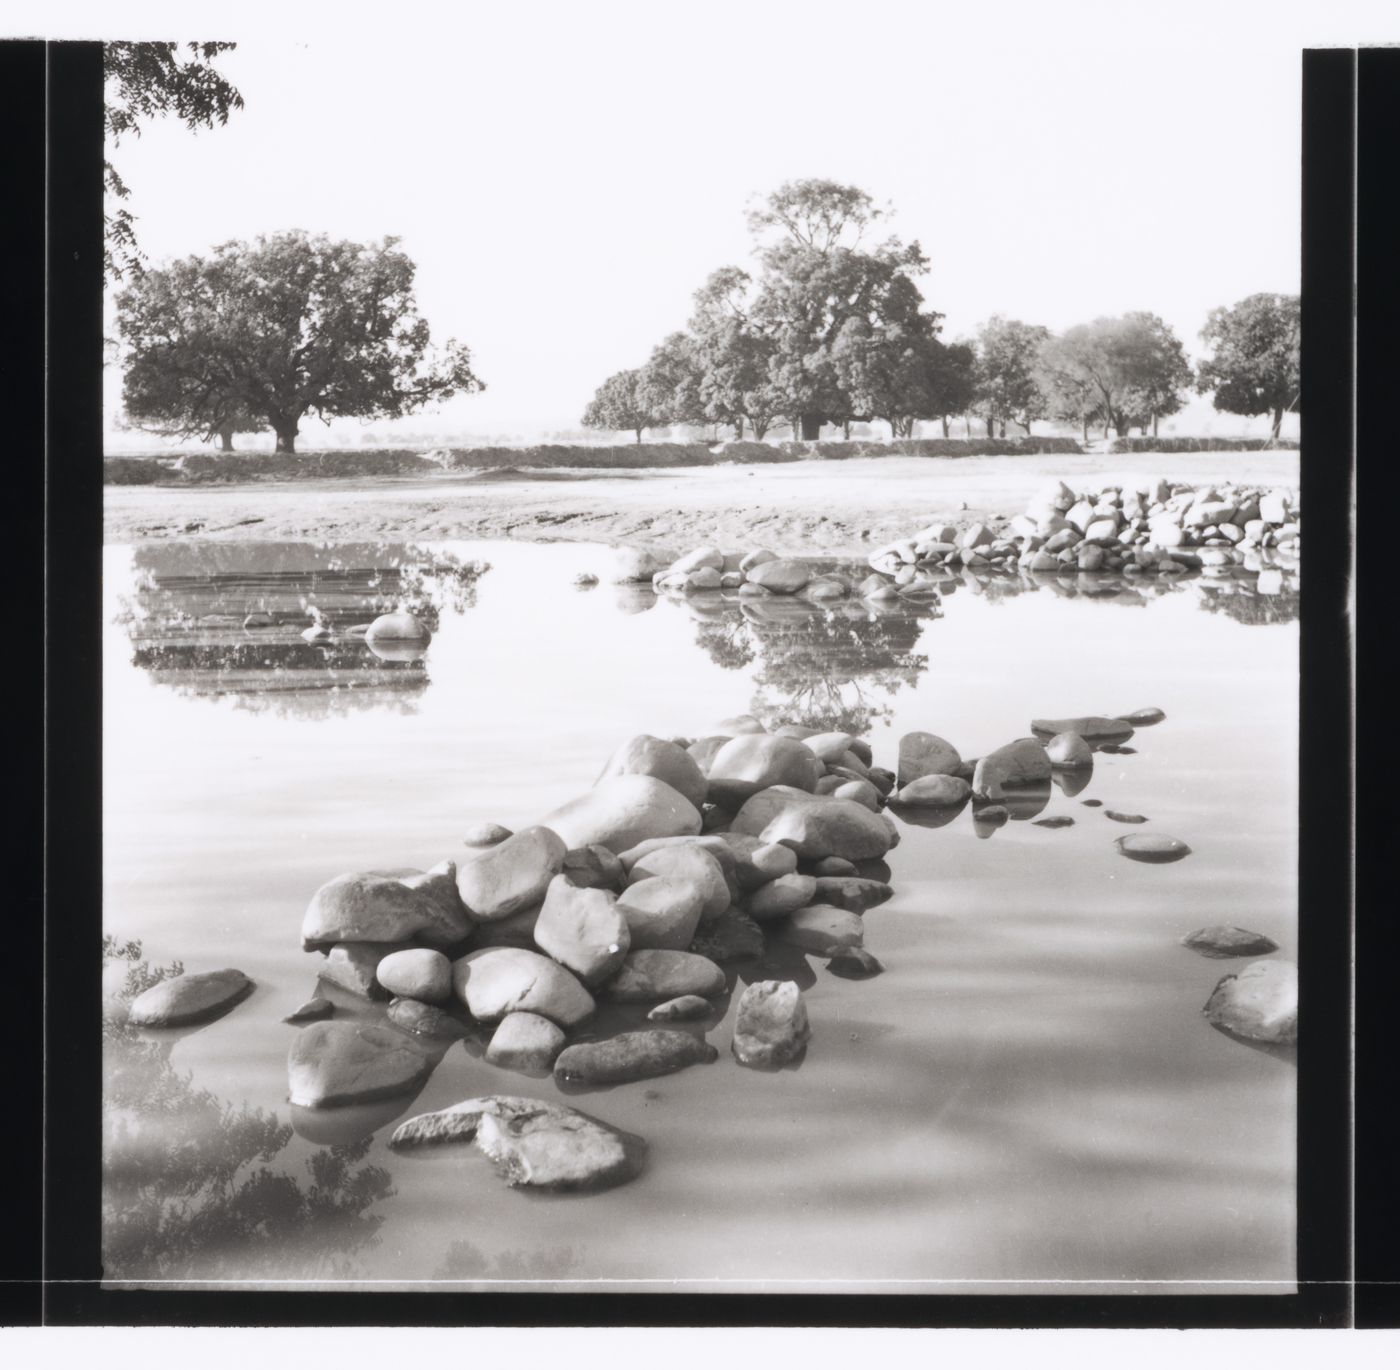 Pond with trees in the background in Chandigarh's area before the construction, India